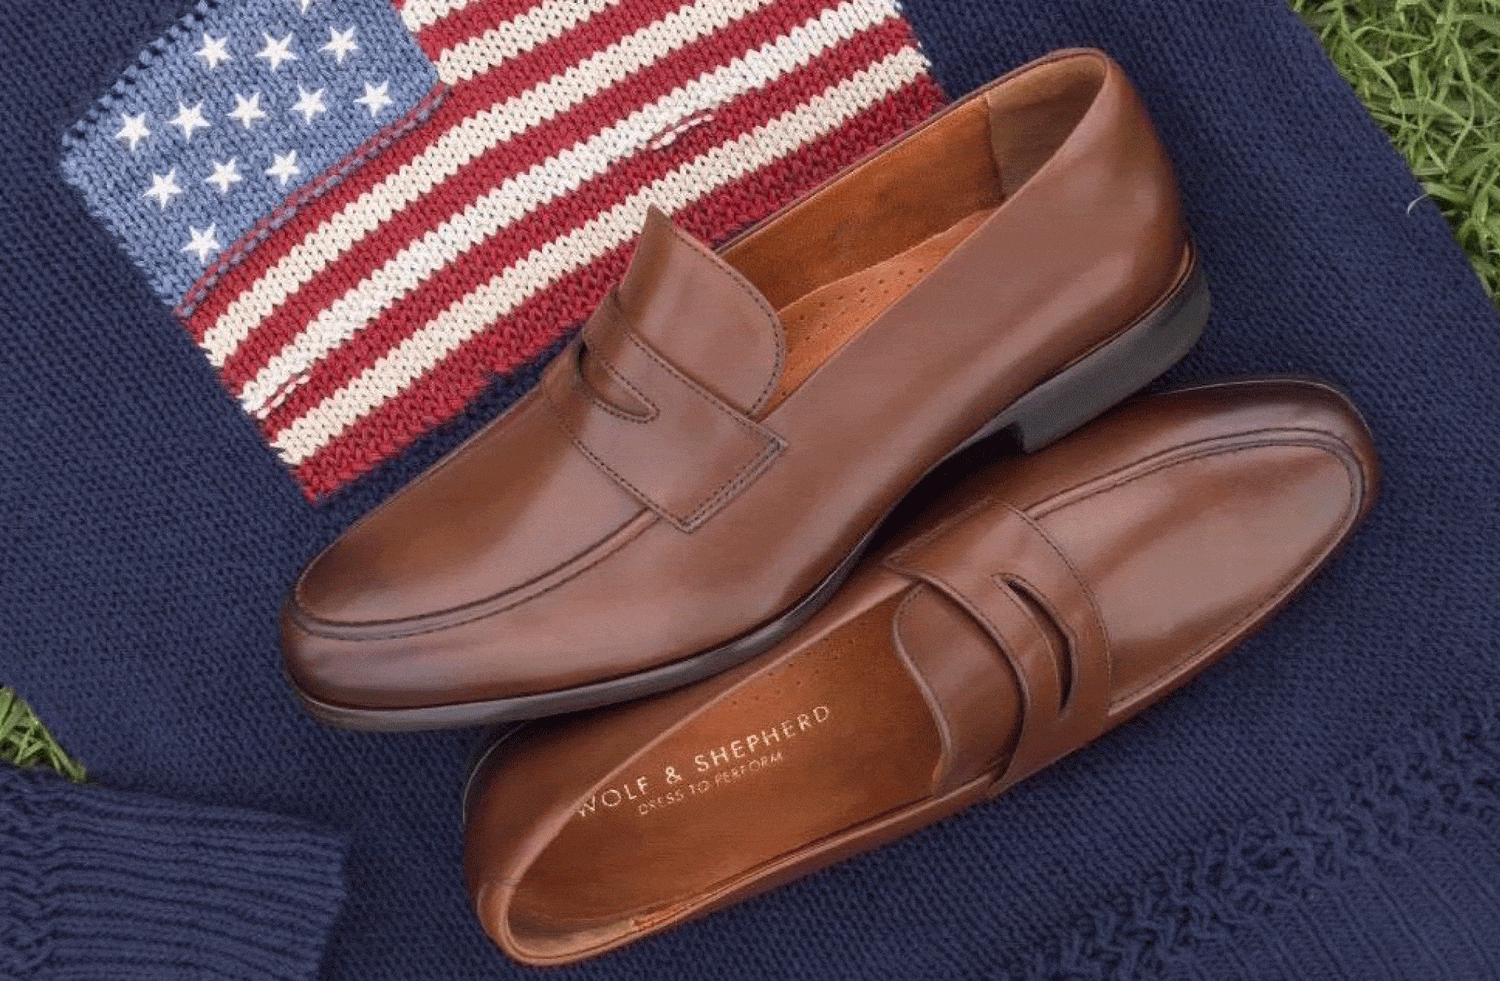 An American Classic: The Penny Loafer